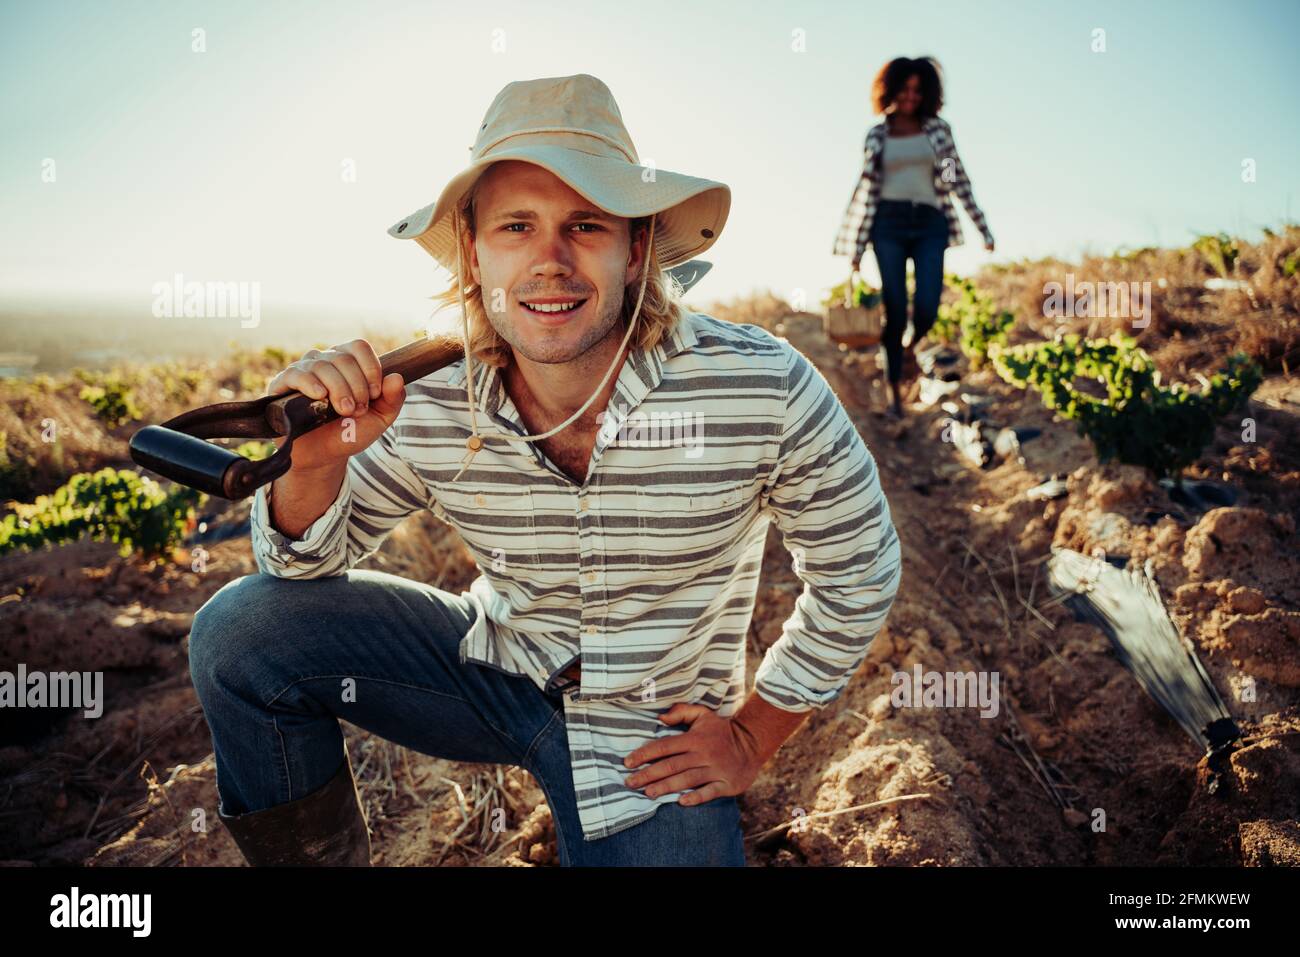 Handsome caucasian male farmer standing by crops holding shovel while female colleague works behind Stock Photo